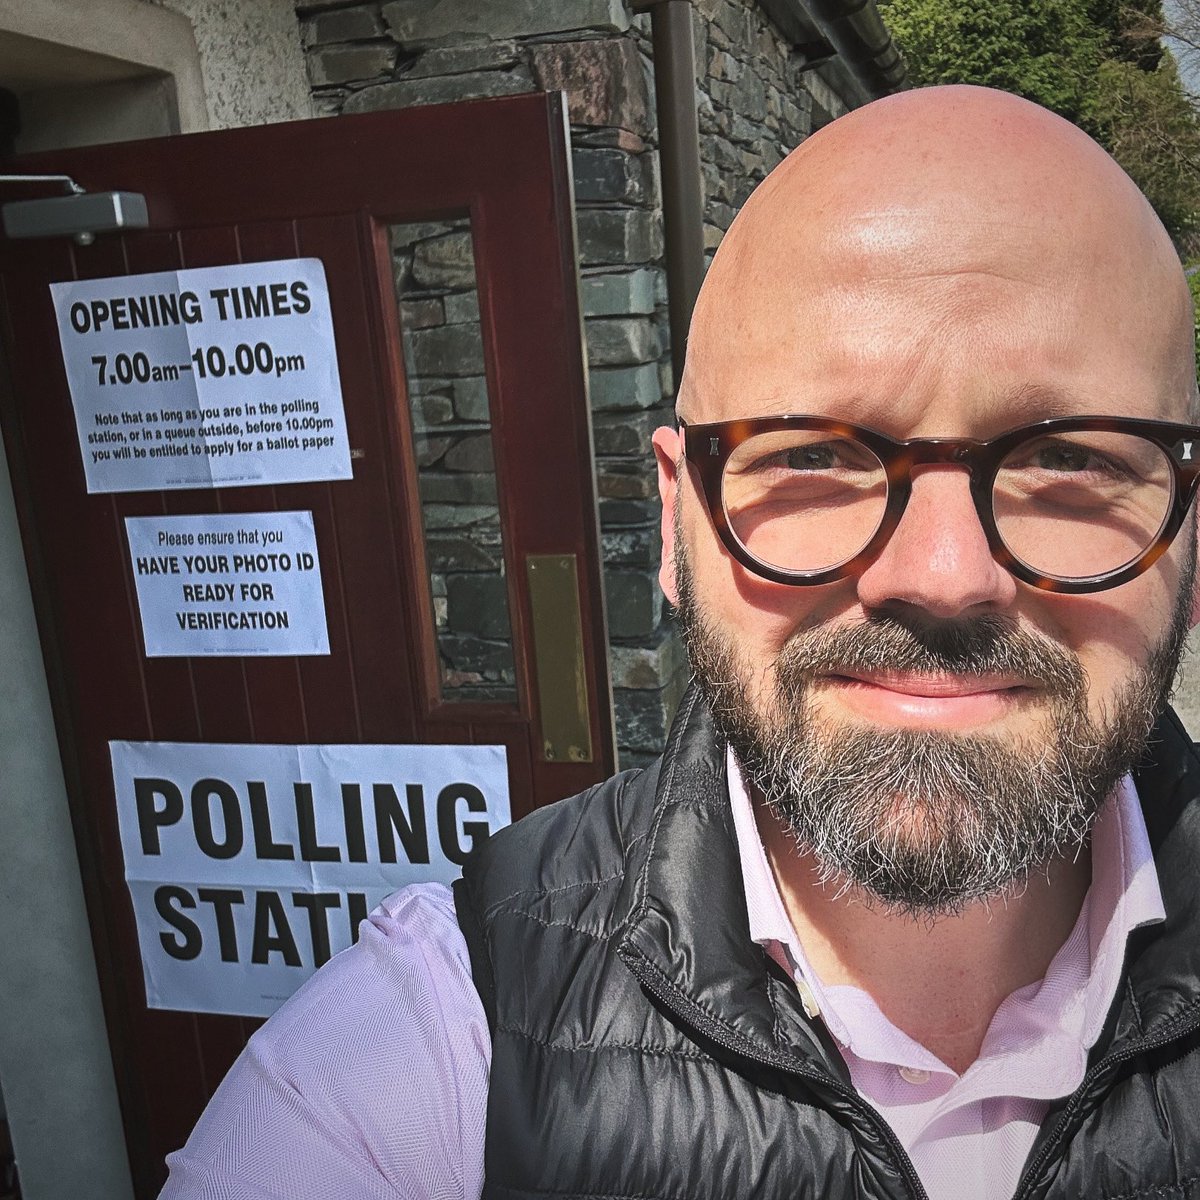 It’s a gloriously sunny day and polls will remain open until 10pm. No matter who you vote for, please do take the time to vote. In Barrow & Furness we have Ulverston Town Council and Police, Fire & Crime Commissioner elections. I was very glad to vote for Mike Johnson. He’s…